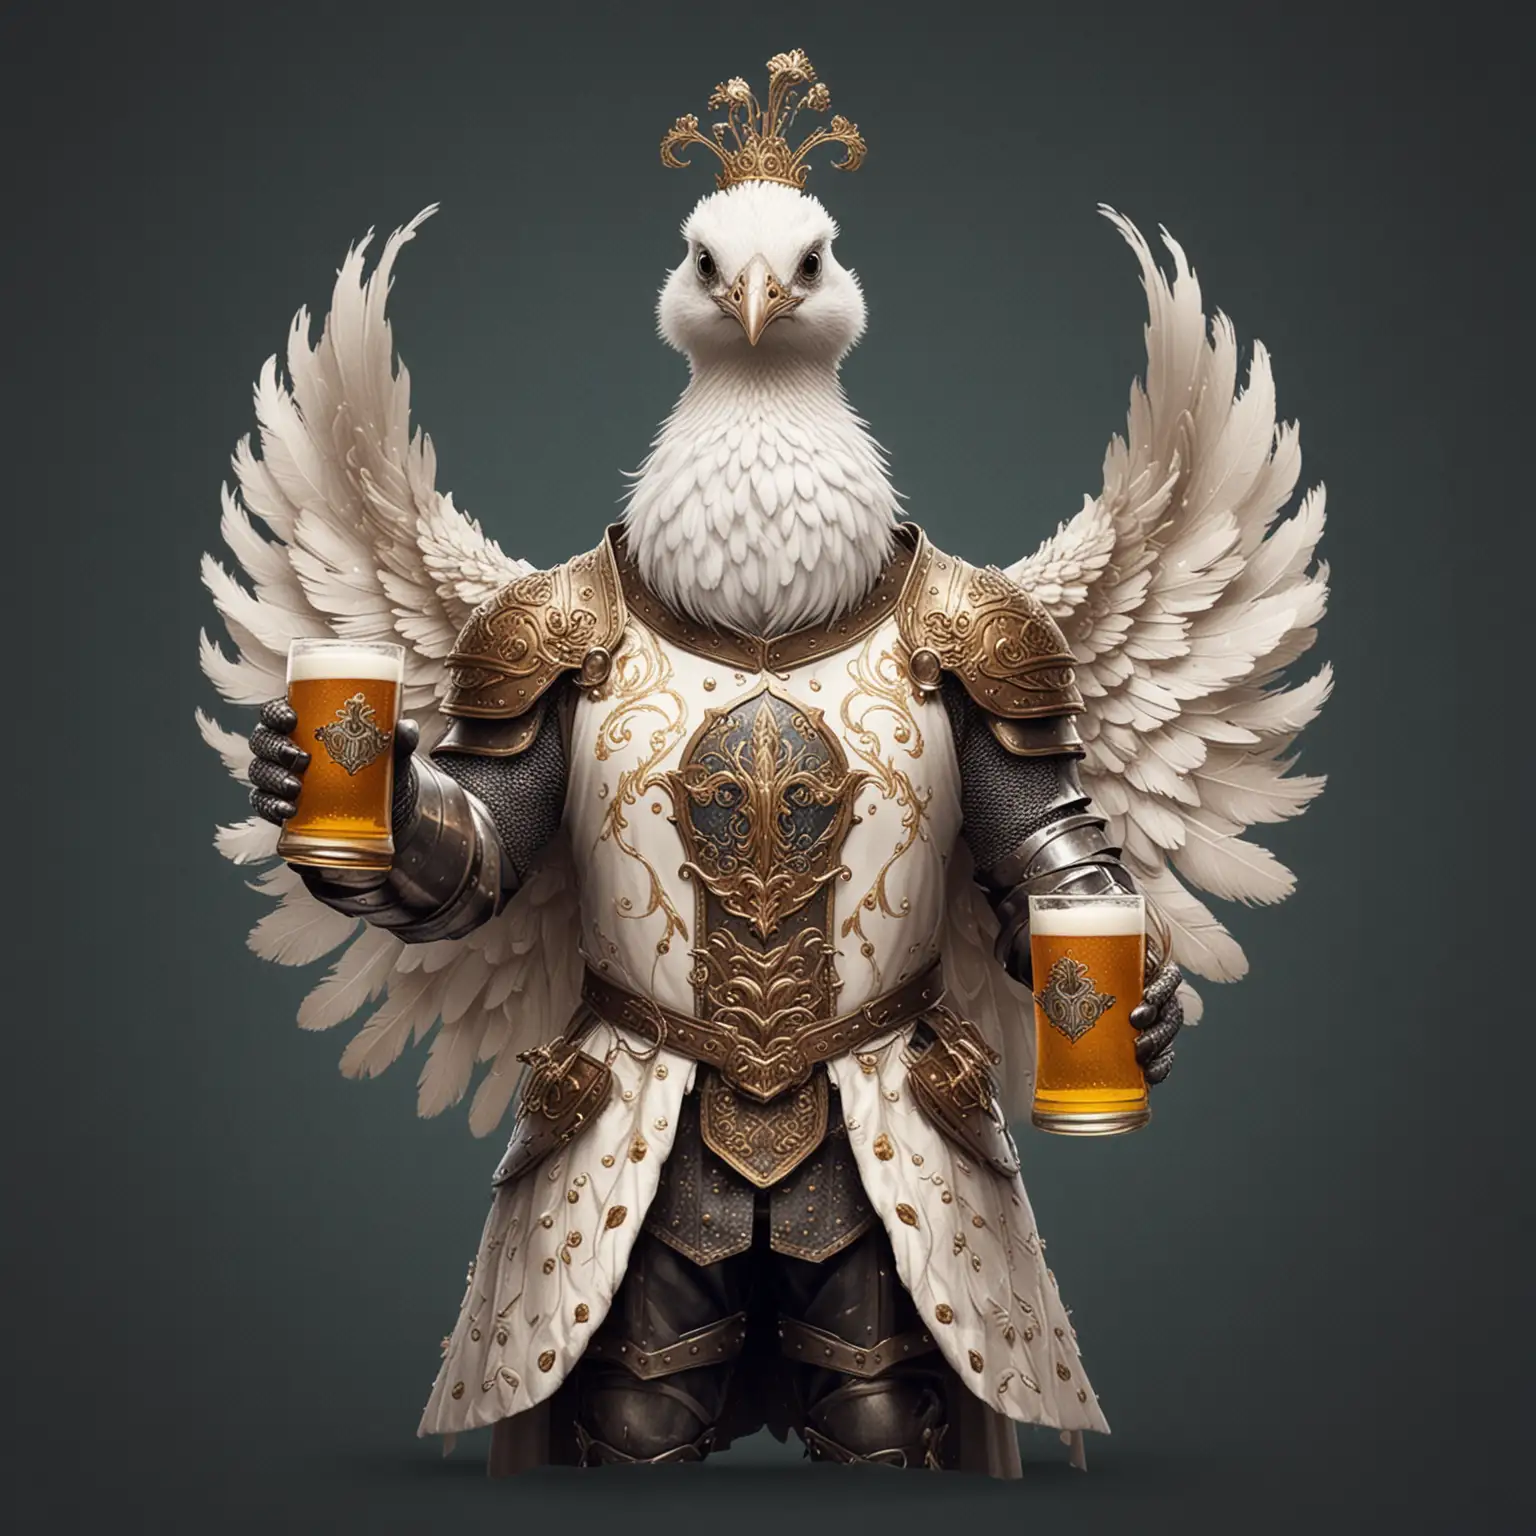 make me an logo from a white peacock dressed as a knight holding a beer